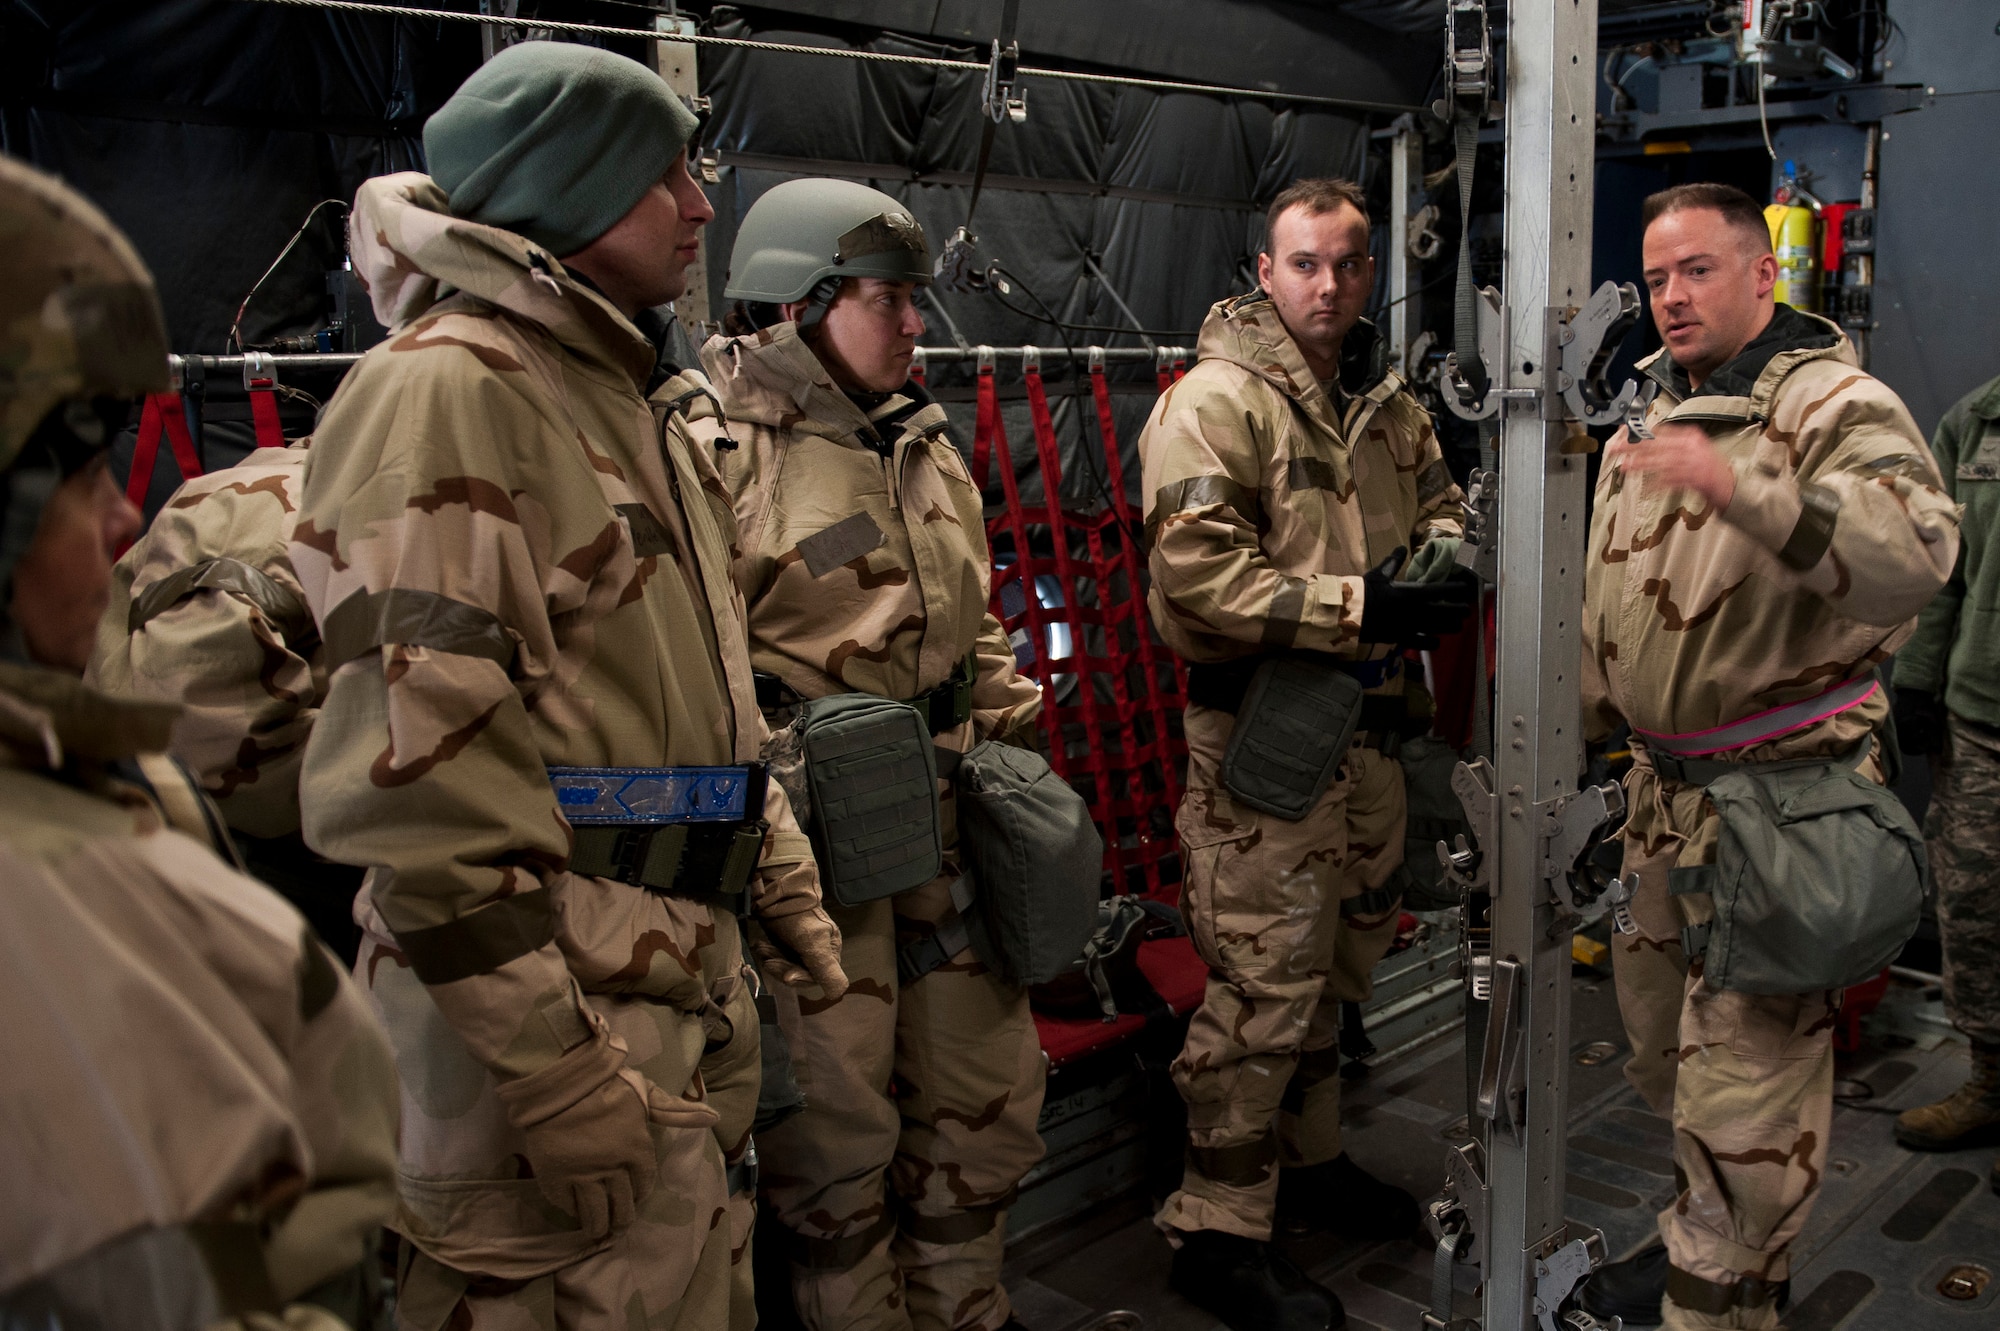 Tech. Sgt. Jacob Appleby, 375th Aeromedical Evacuation Squadron mission management NCO in charge, explains how to prepare the inside of a C-130 Hercules for patient transport during an exercise at Scott Air Force Base, Illinois, Feb. 6, 2018. The 375th AES provides rapid response aeromedical evacuation capability for any contingency. (U.S. Air Force photo by Staff Sgt. Clayton Lenhardt)